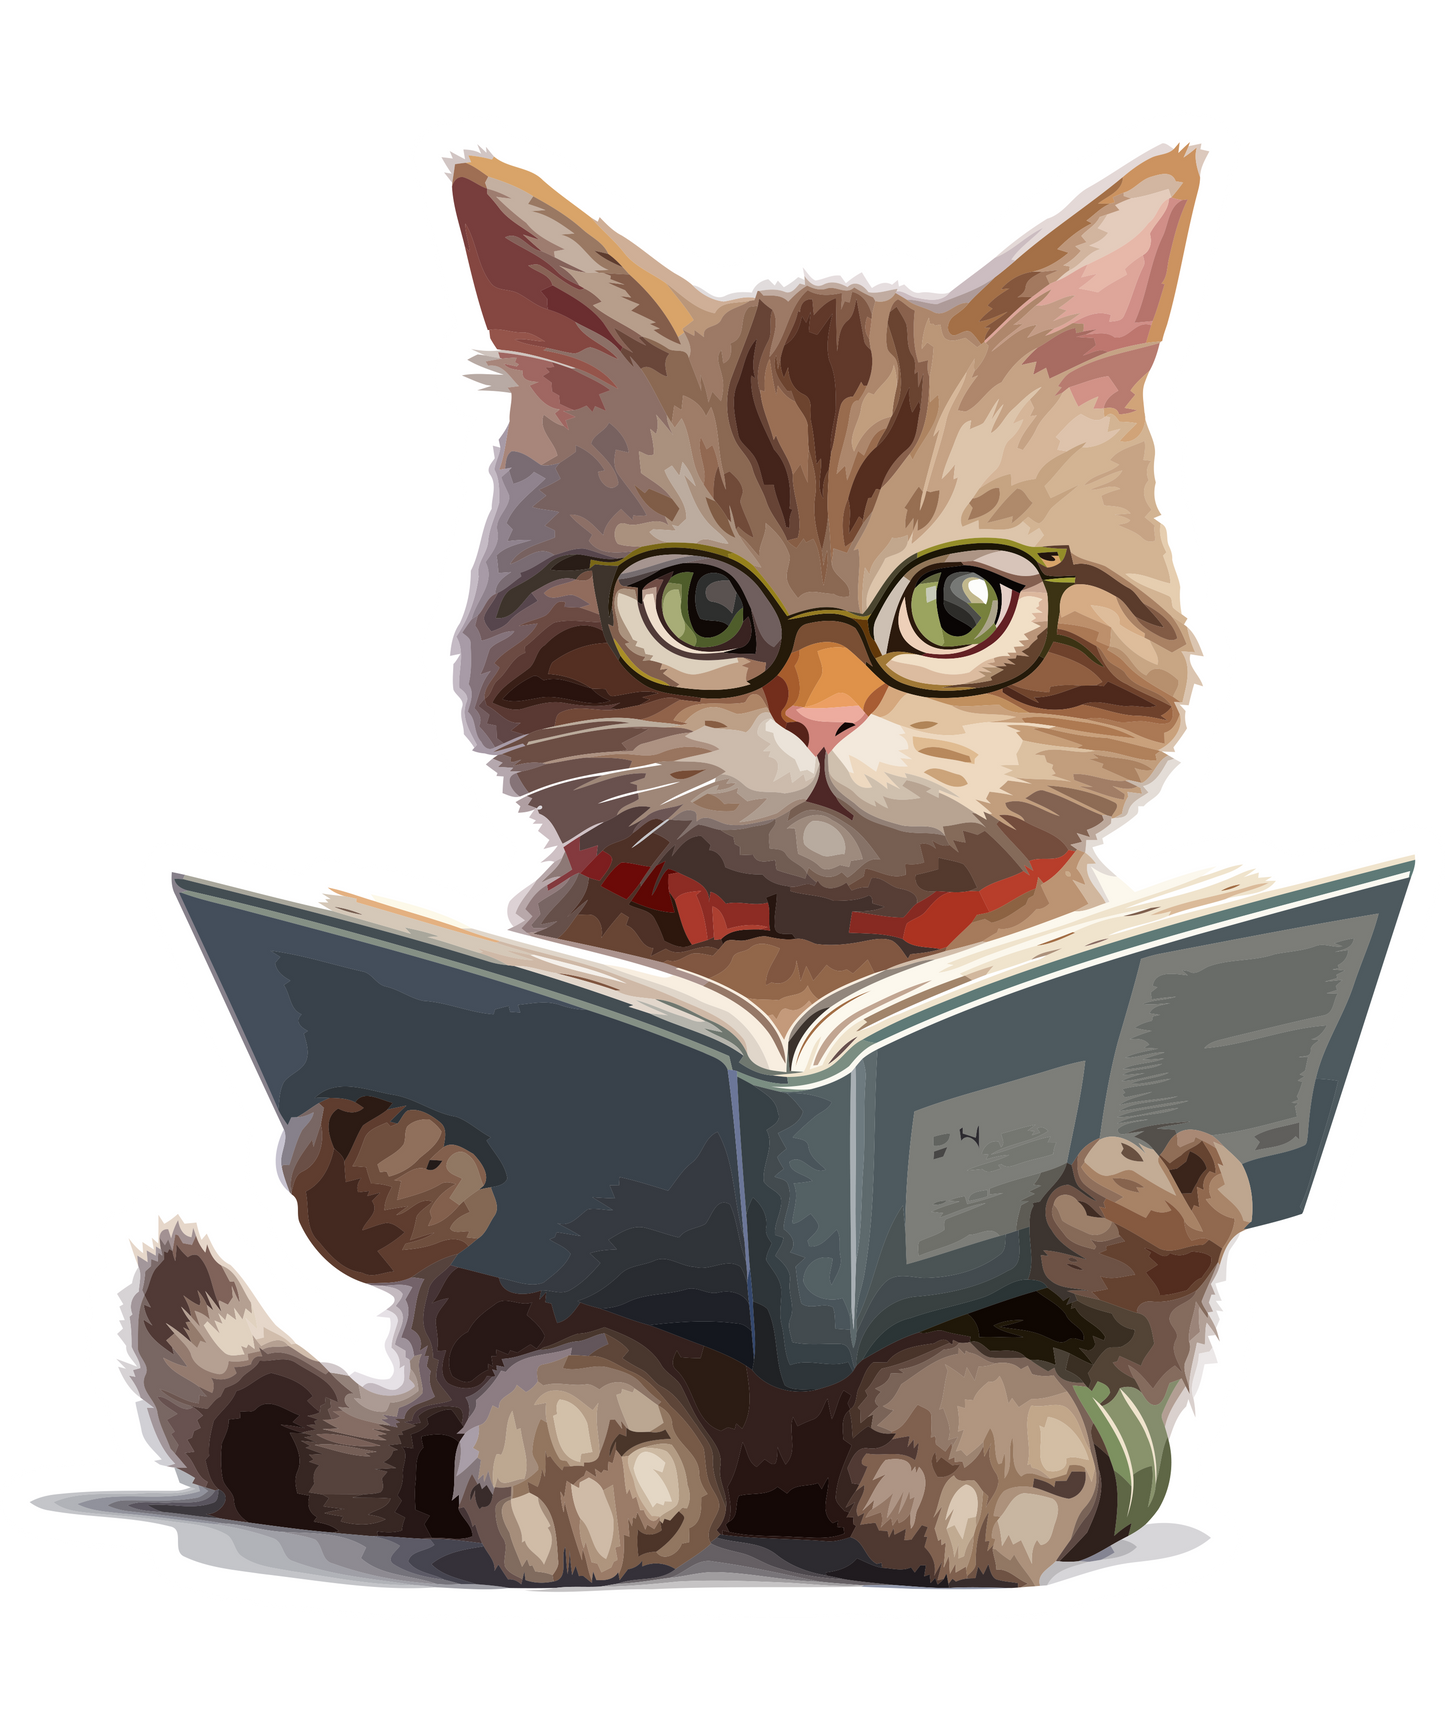 Stickers - Tabby Cat Reading a Book Sticker, Book Lovers' Stickers